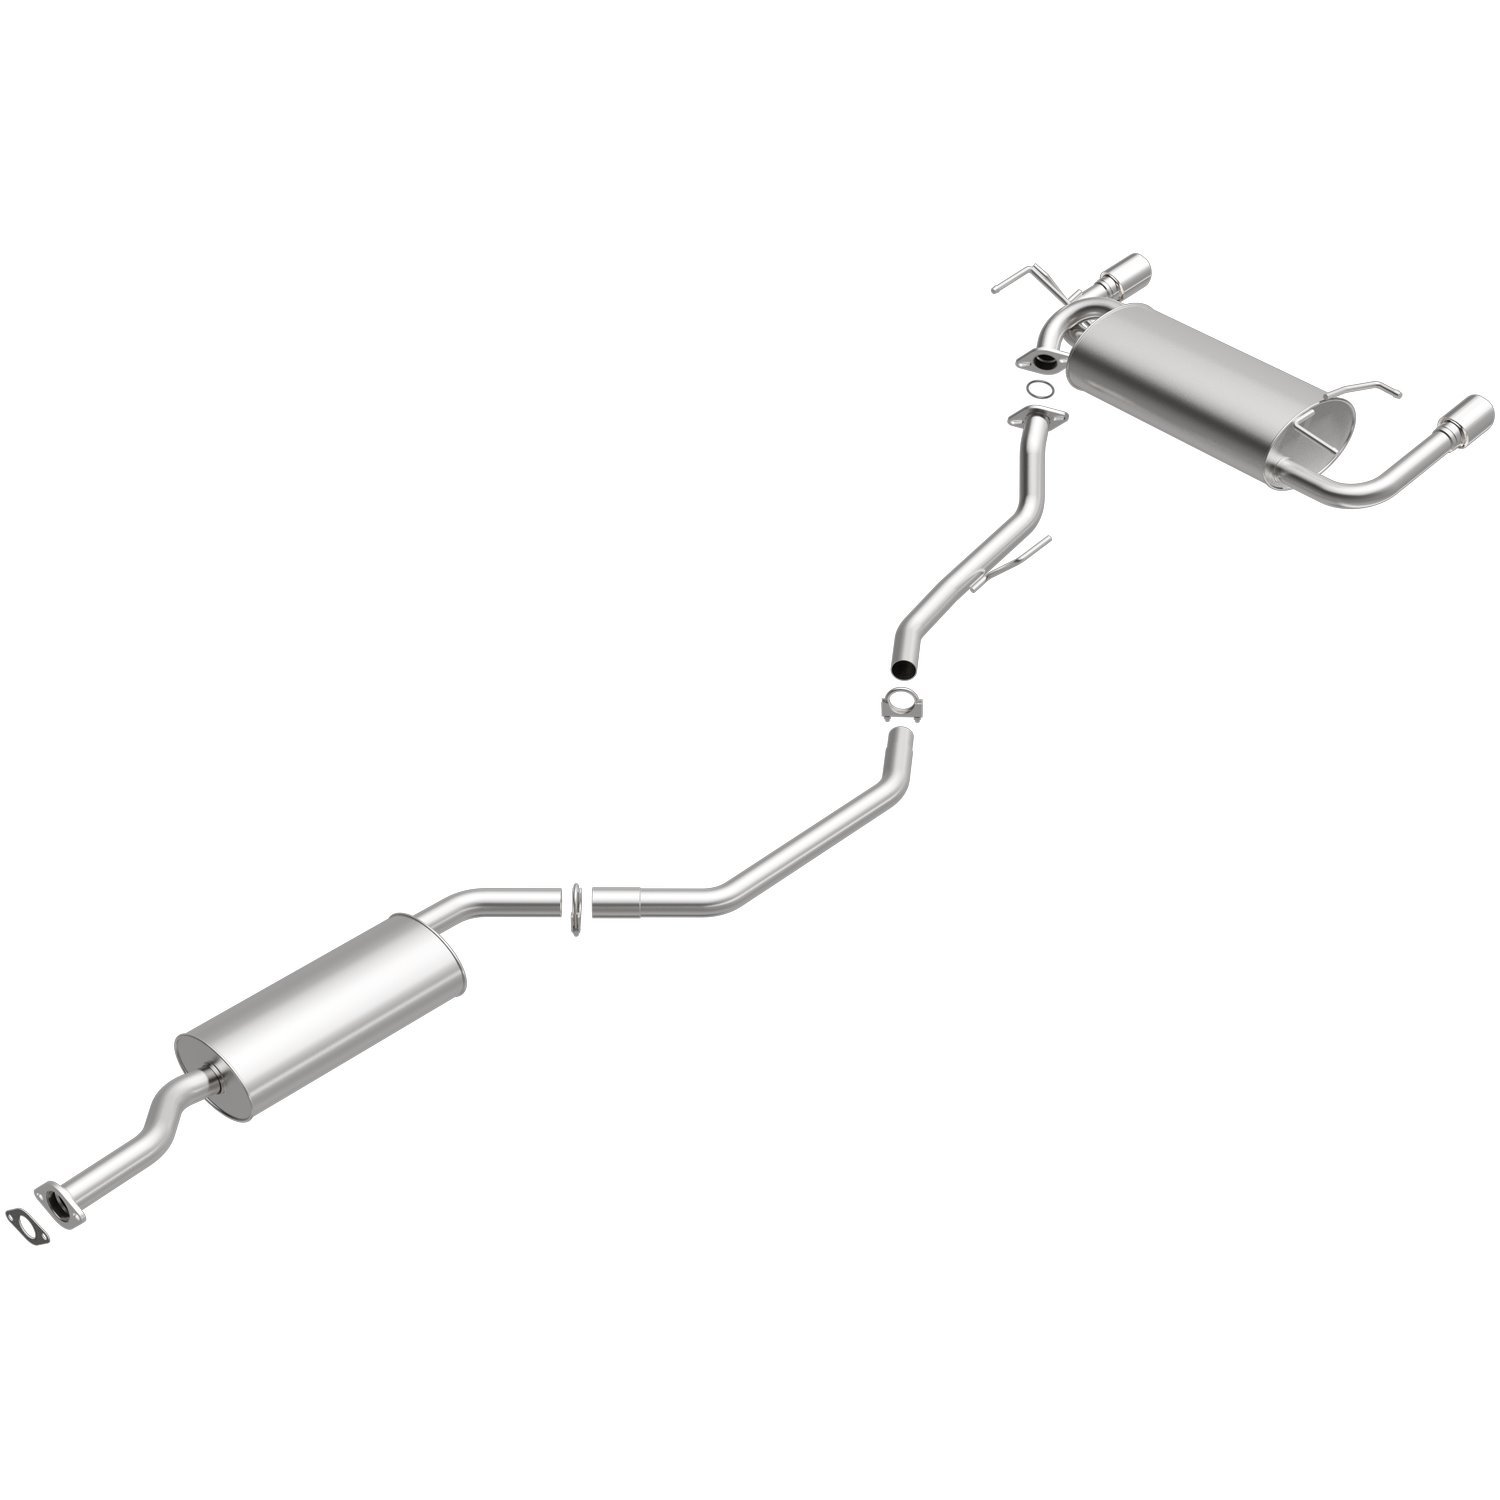 Direct-Fit Exhaust Kit, 2003-2007 Nissan Murano 3.5L